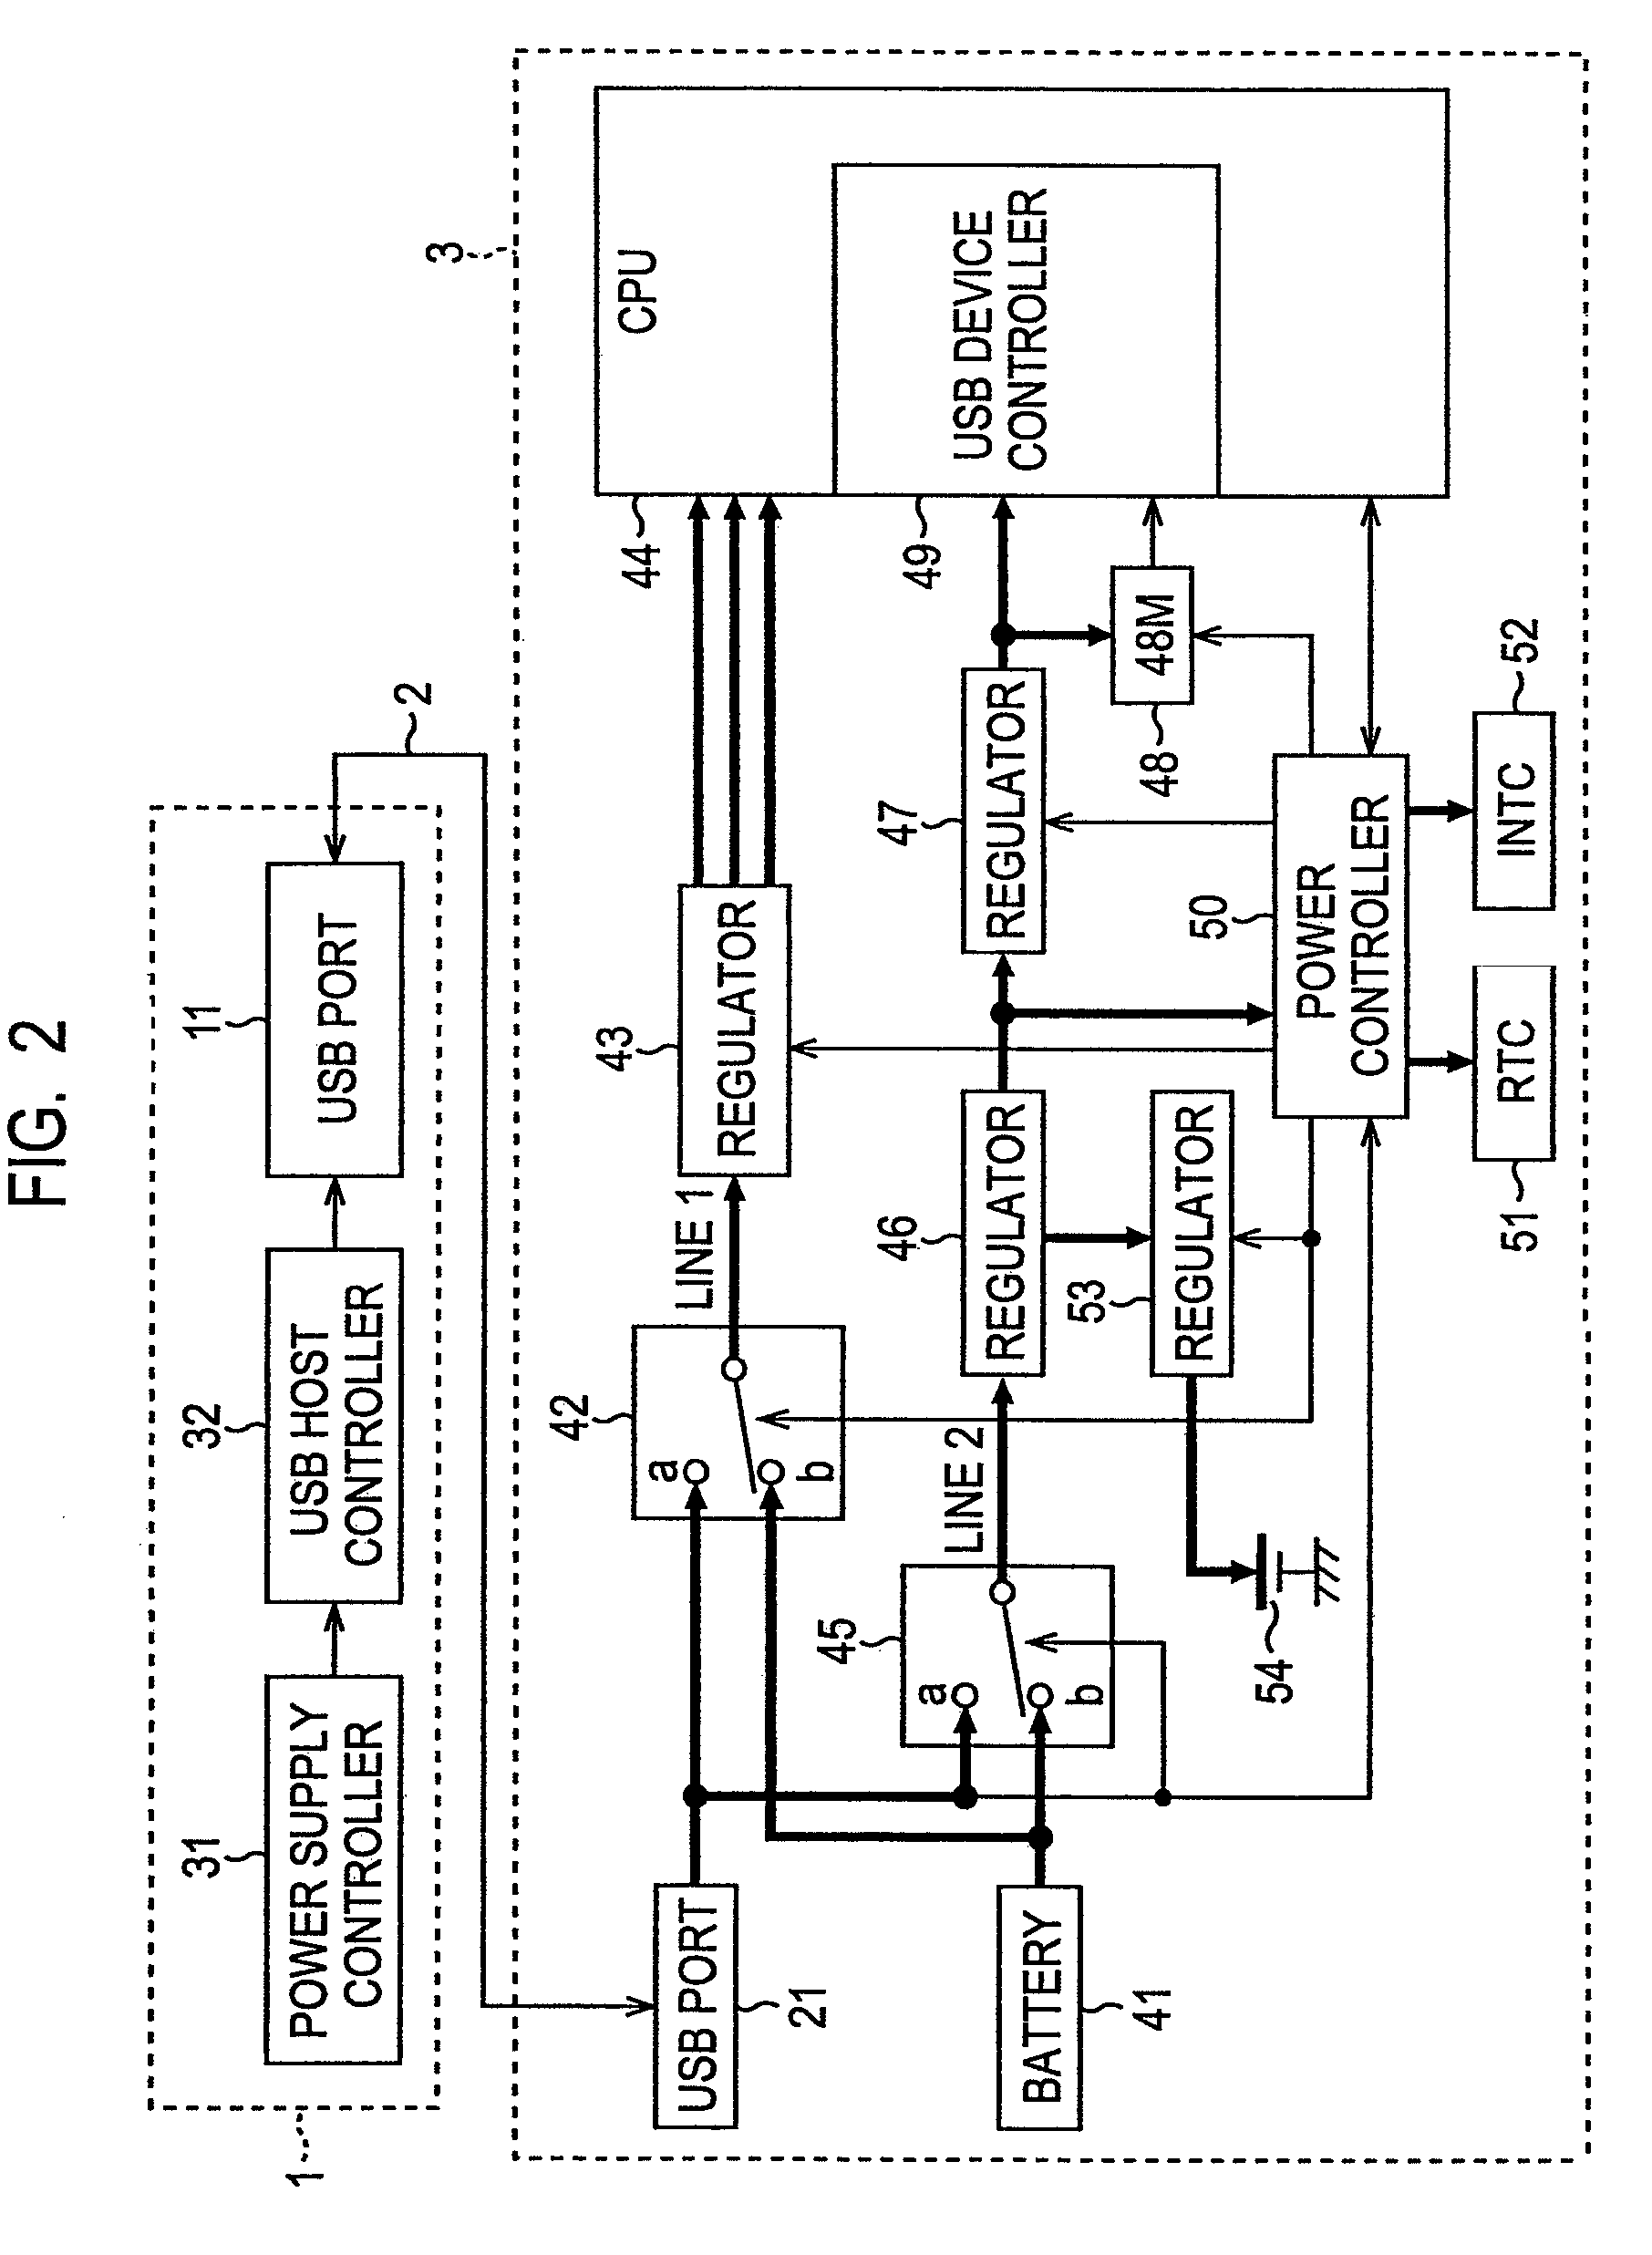 Electronic apparatus and power supply controlling method